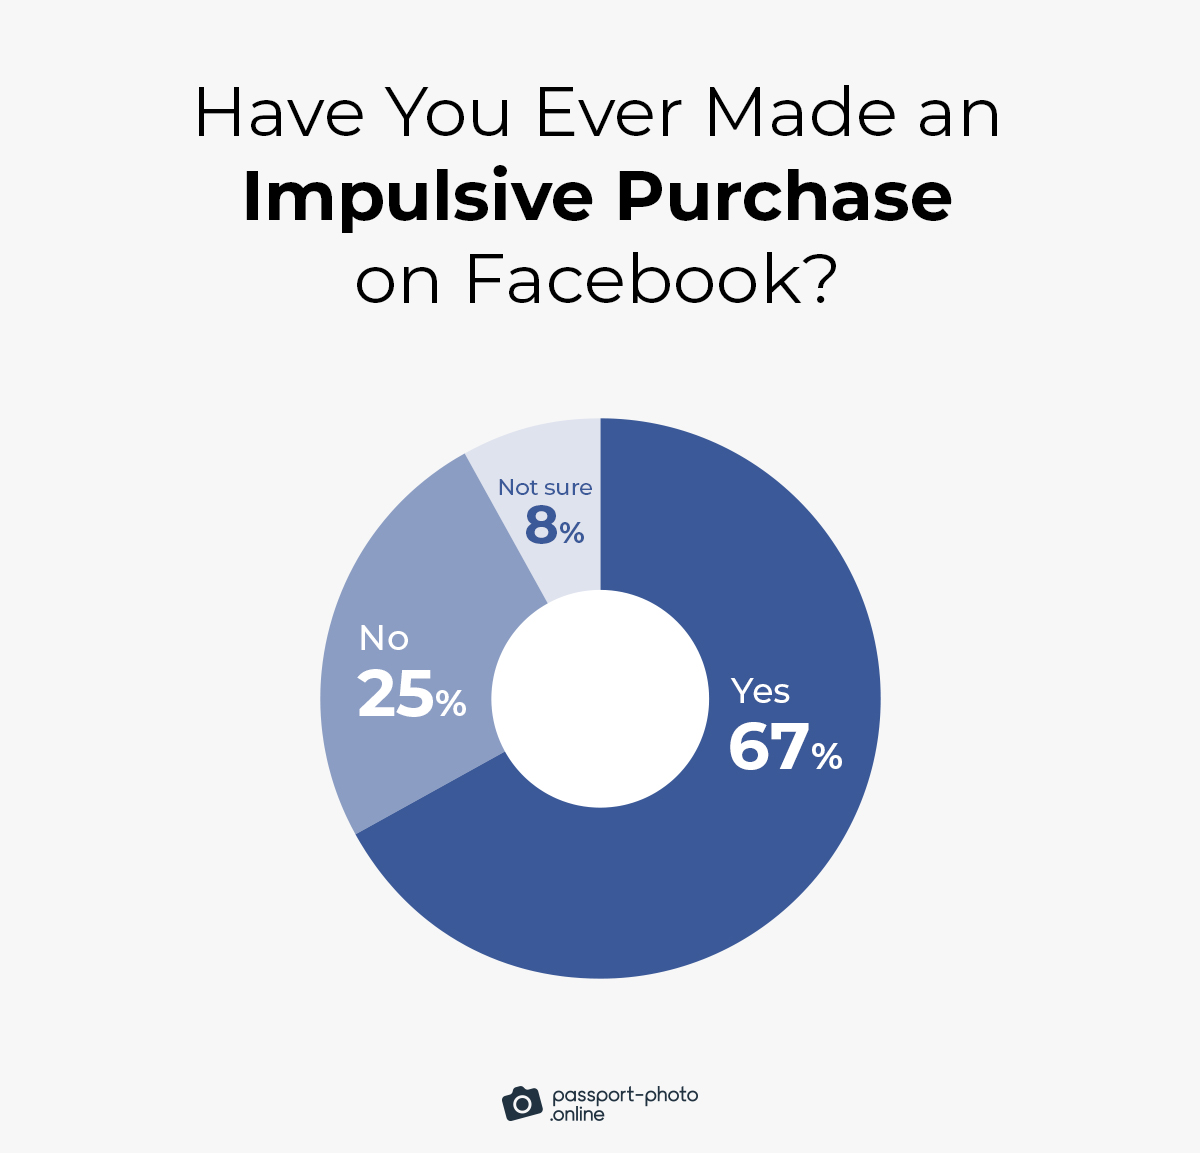 67% of people on Facebook have made an impulsive purchase on the site at least once in their lifetime